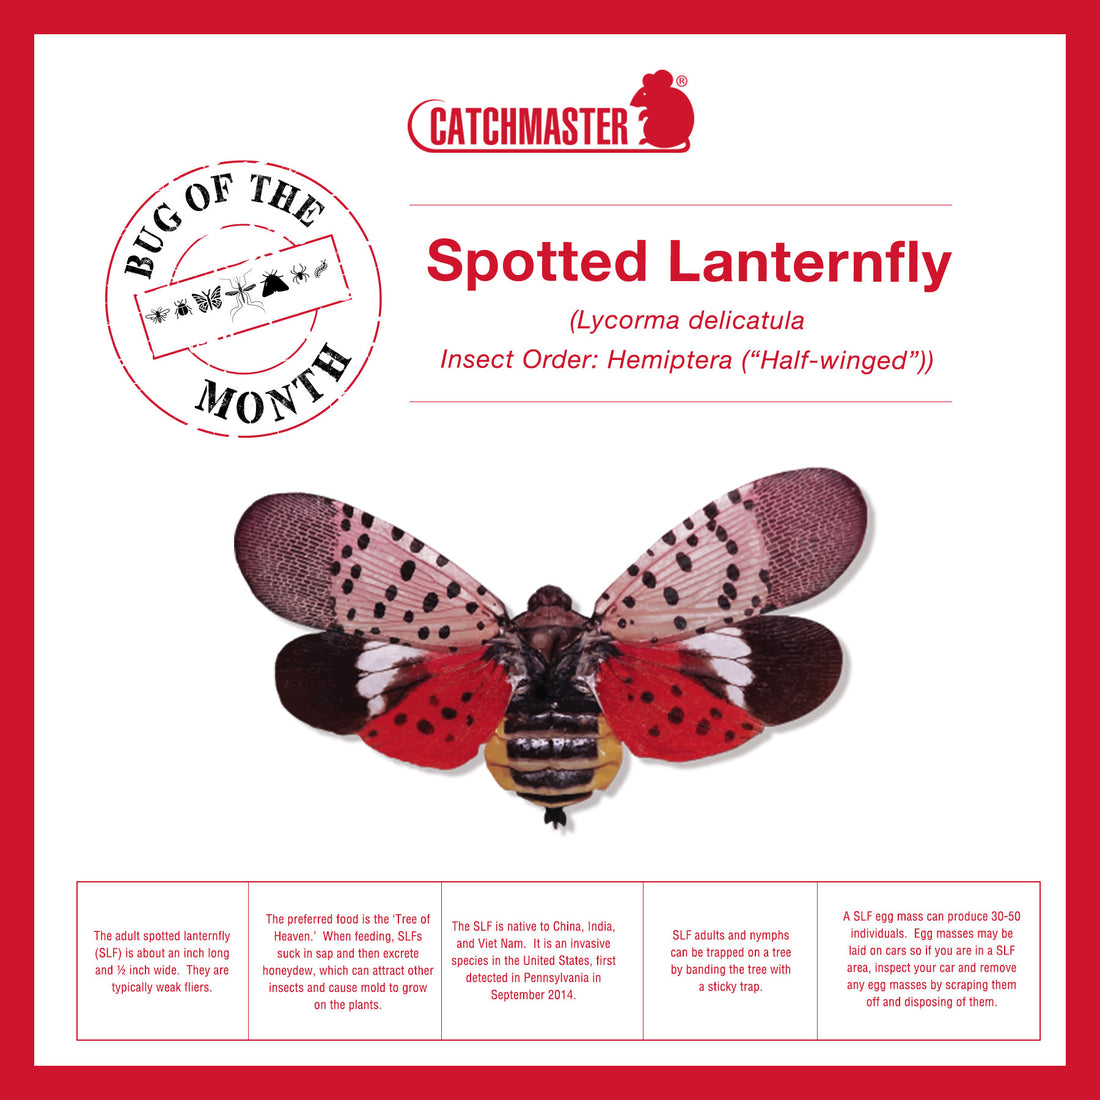 Captain Stan’s ‘Creature Features’ Volume 5 – Spotted Lanternfly August 2022